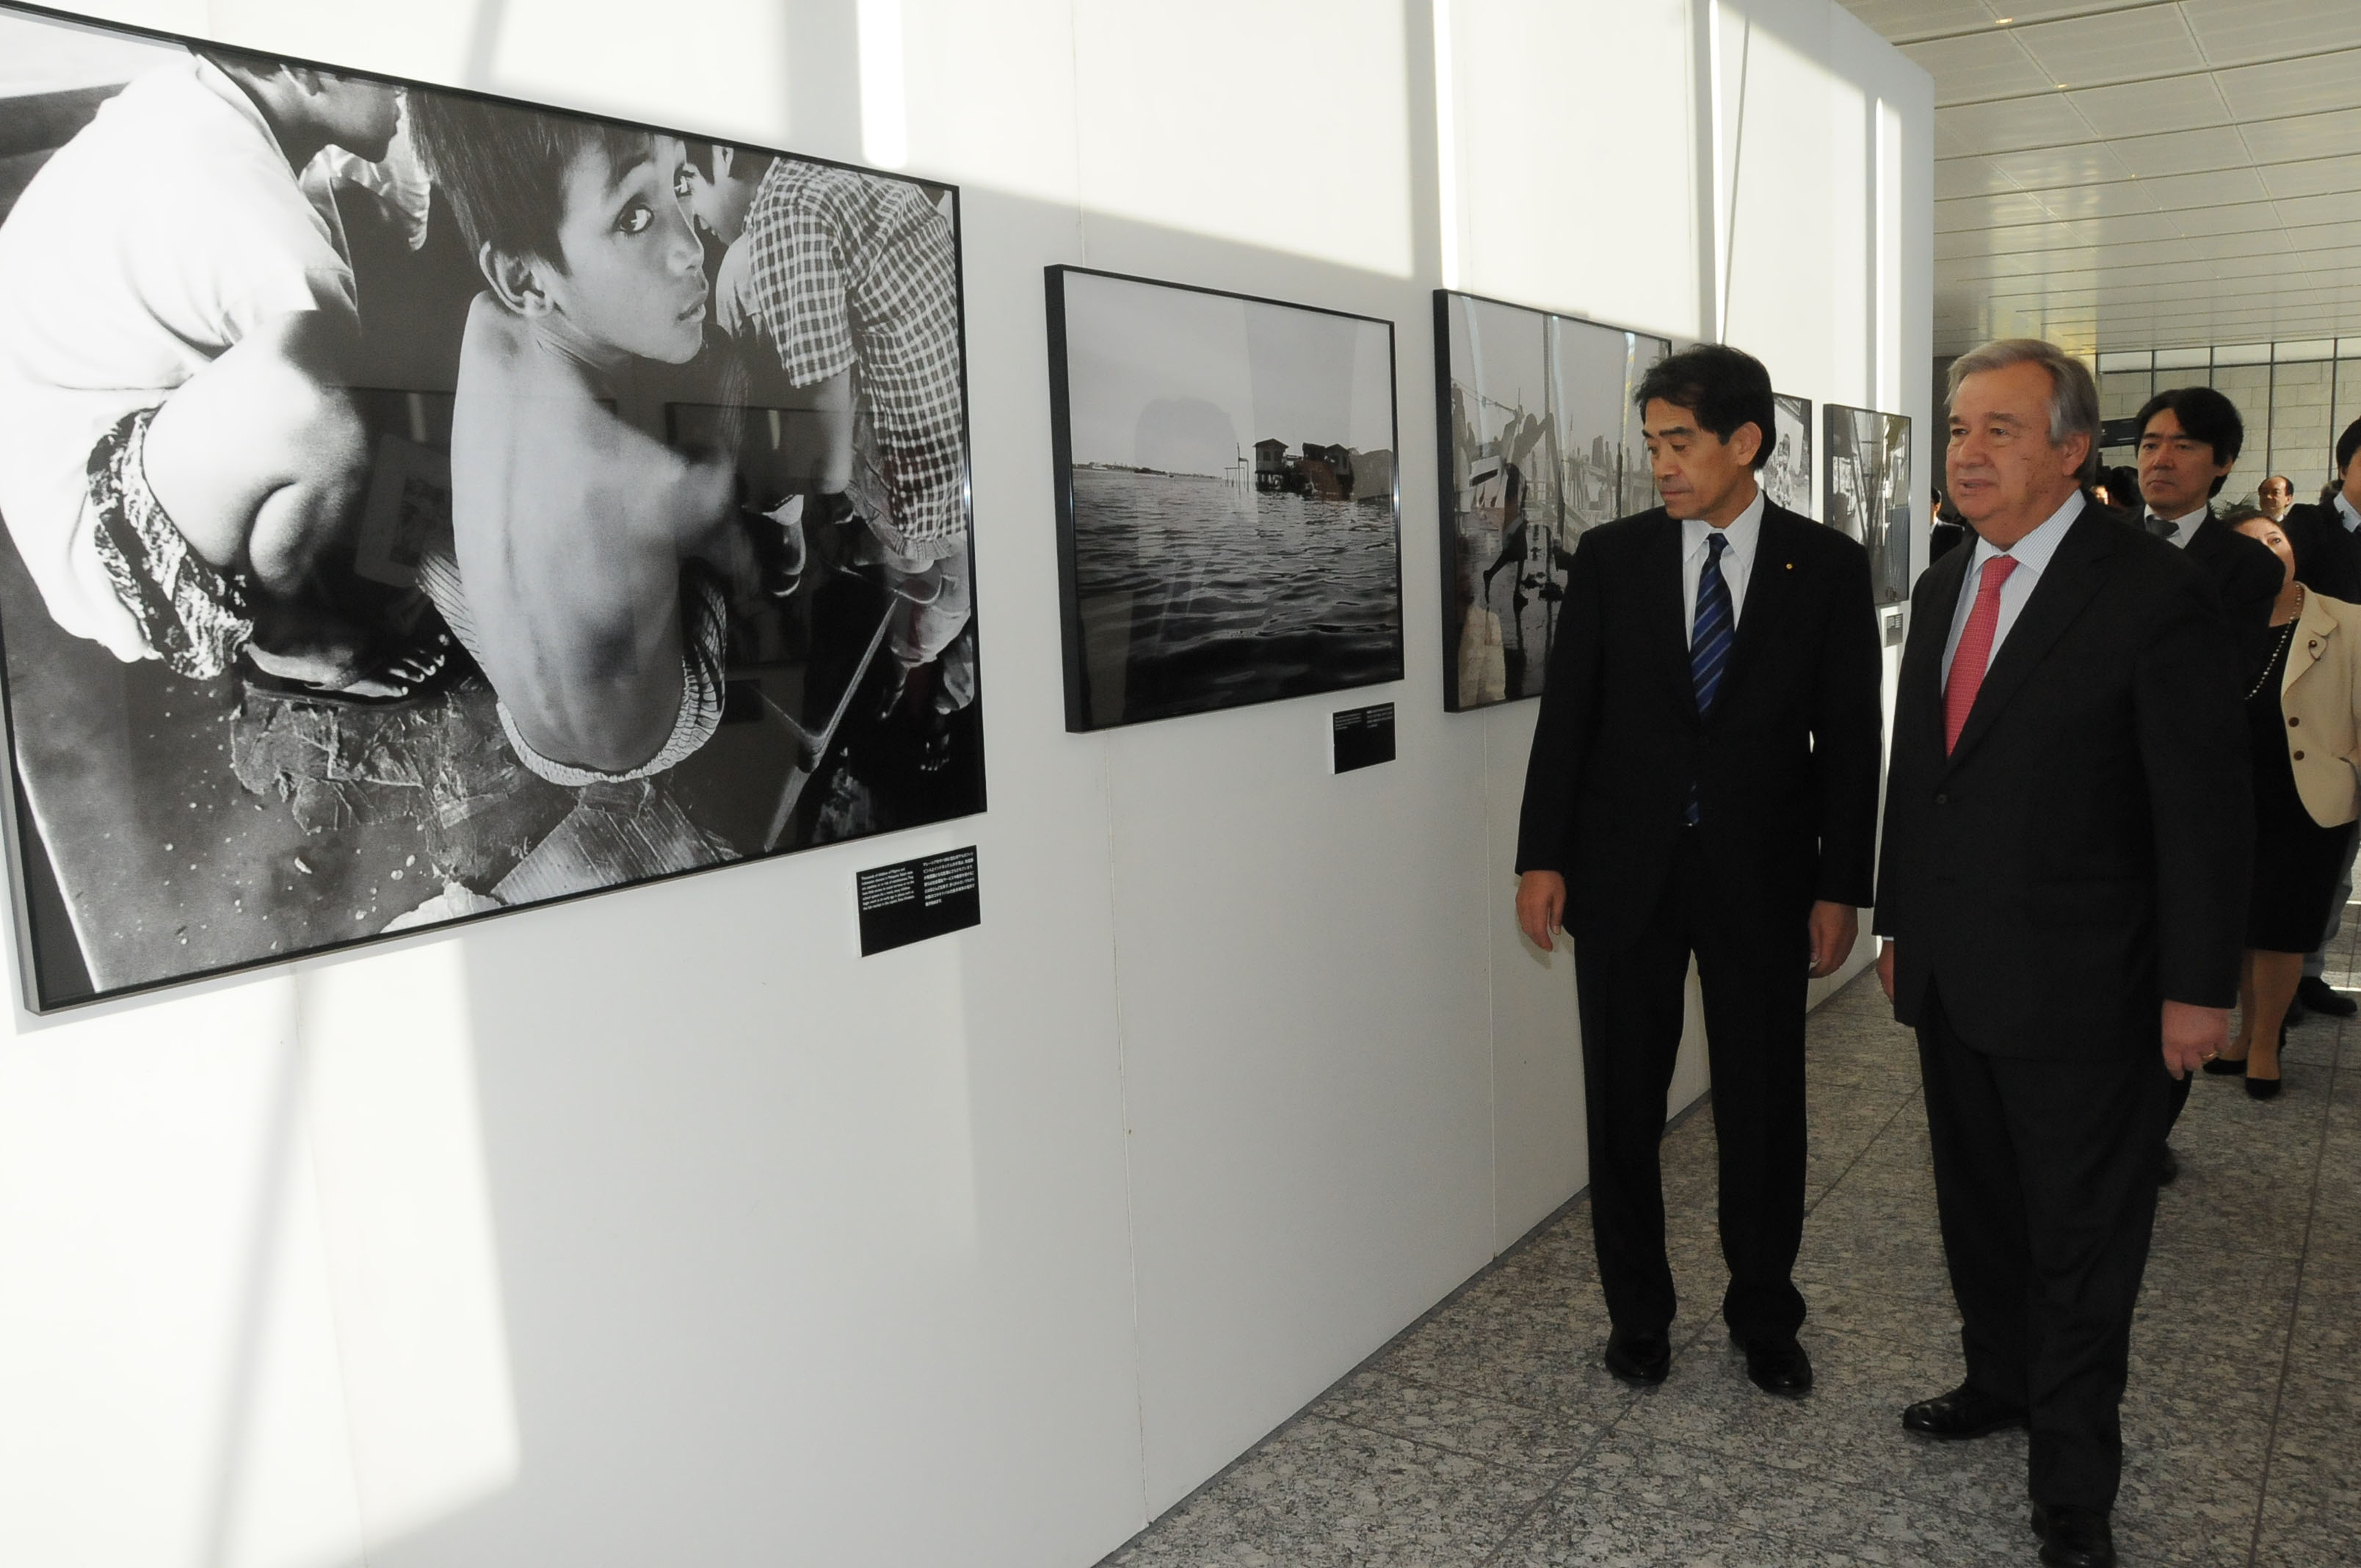 U.N. High Commissioner for Refugees Antonio Guterres (right) views 'Nowhere People,' a photo exhibition about stateless people, during a visit to a Lower House office building in Tokyo on Nov. 13. | SATOKO KAWASAKI